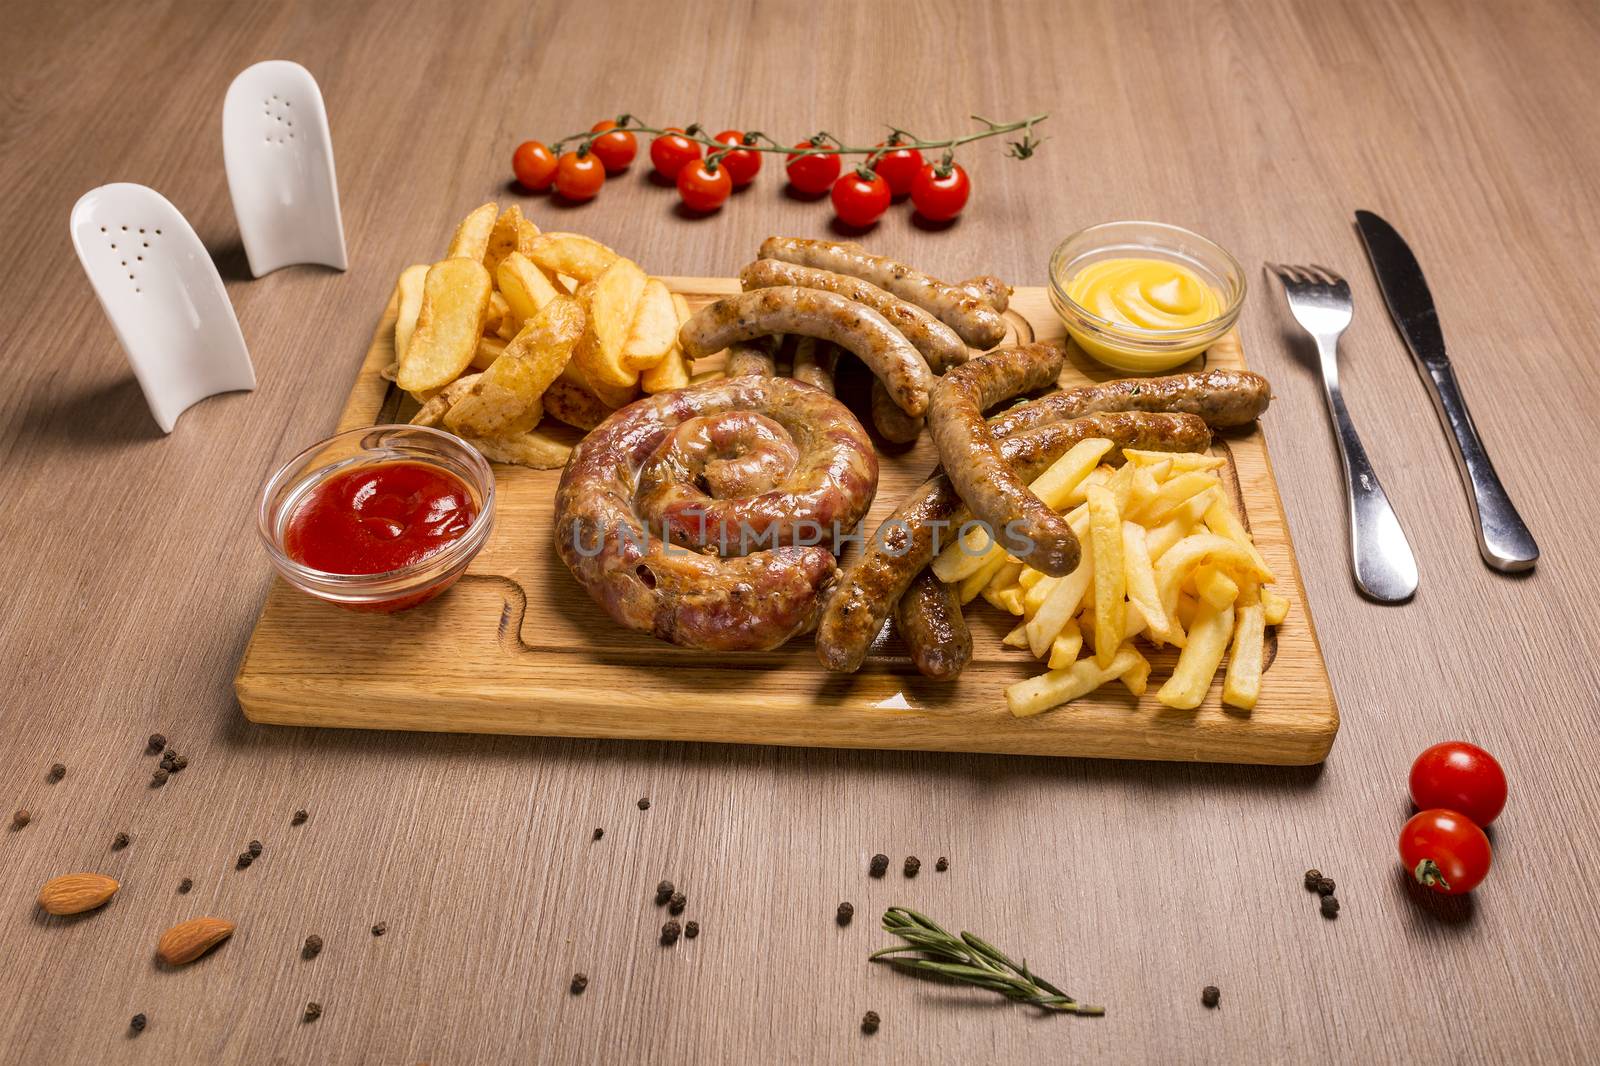 Set of grilled sausages a wooden board hunting sausages, pork sausages, homemade by 977_ReX_977